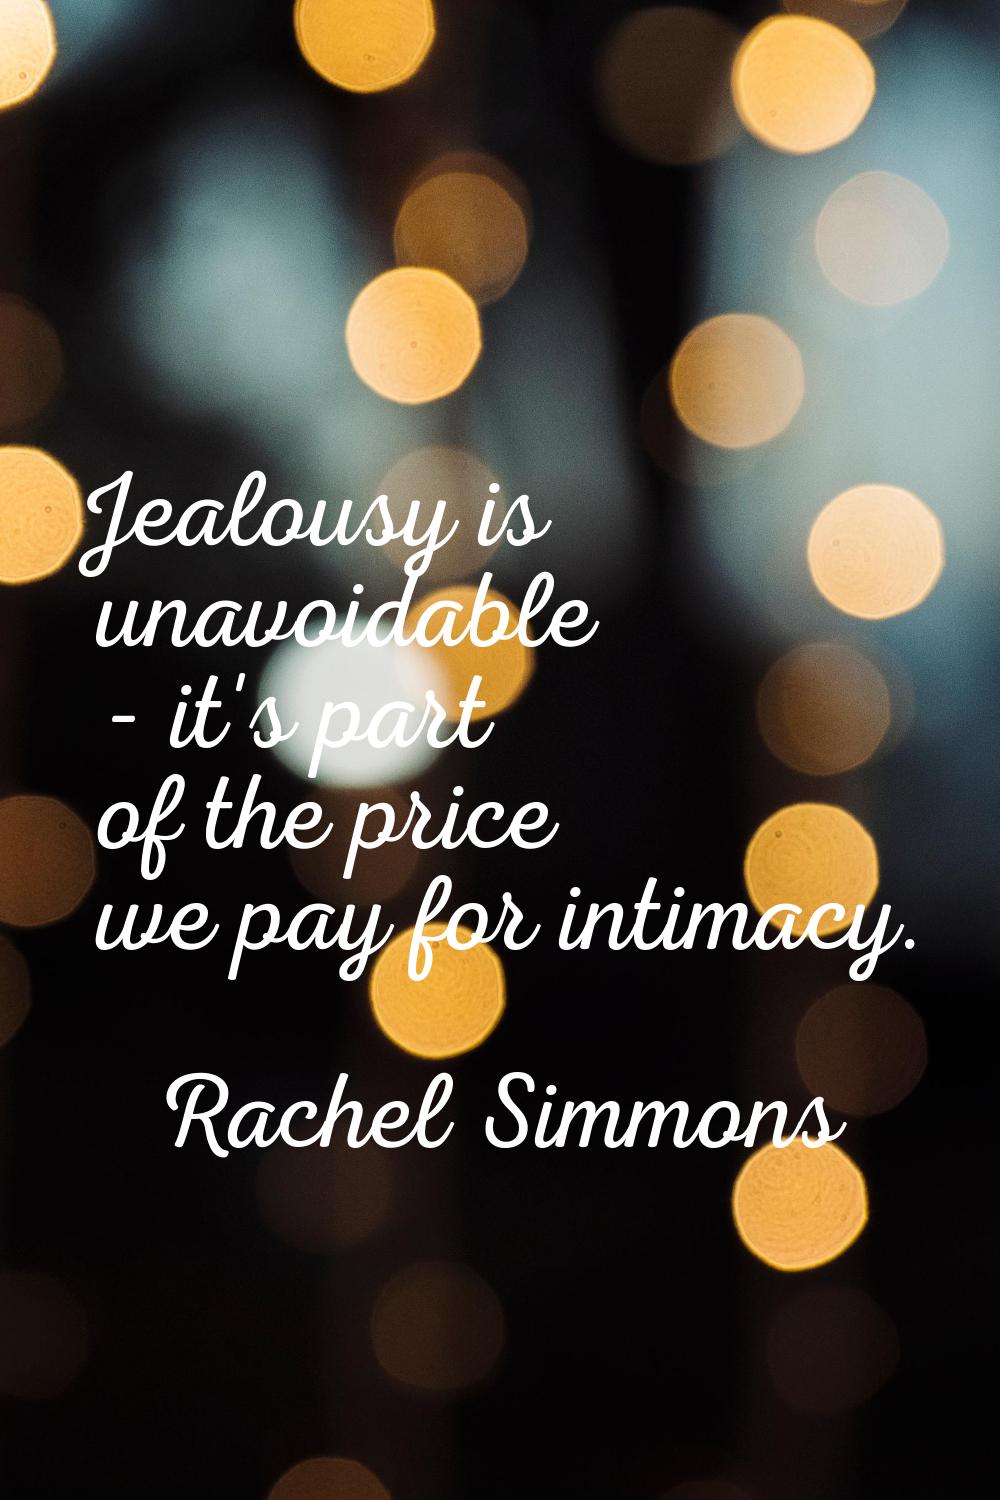 Jealousy is unavoidable - it's part of the price we pay for intimacy.